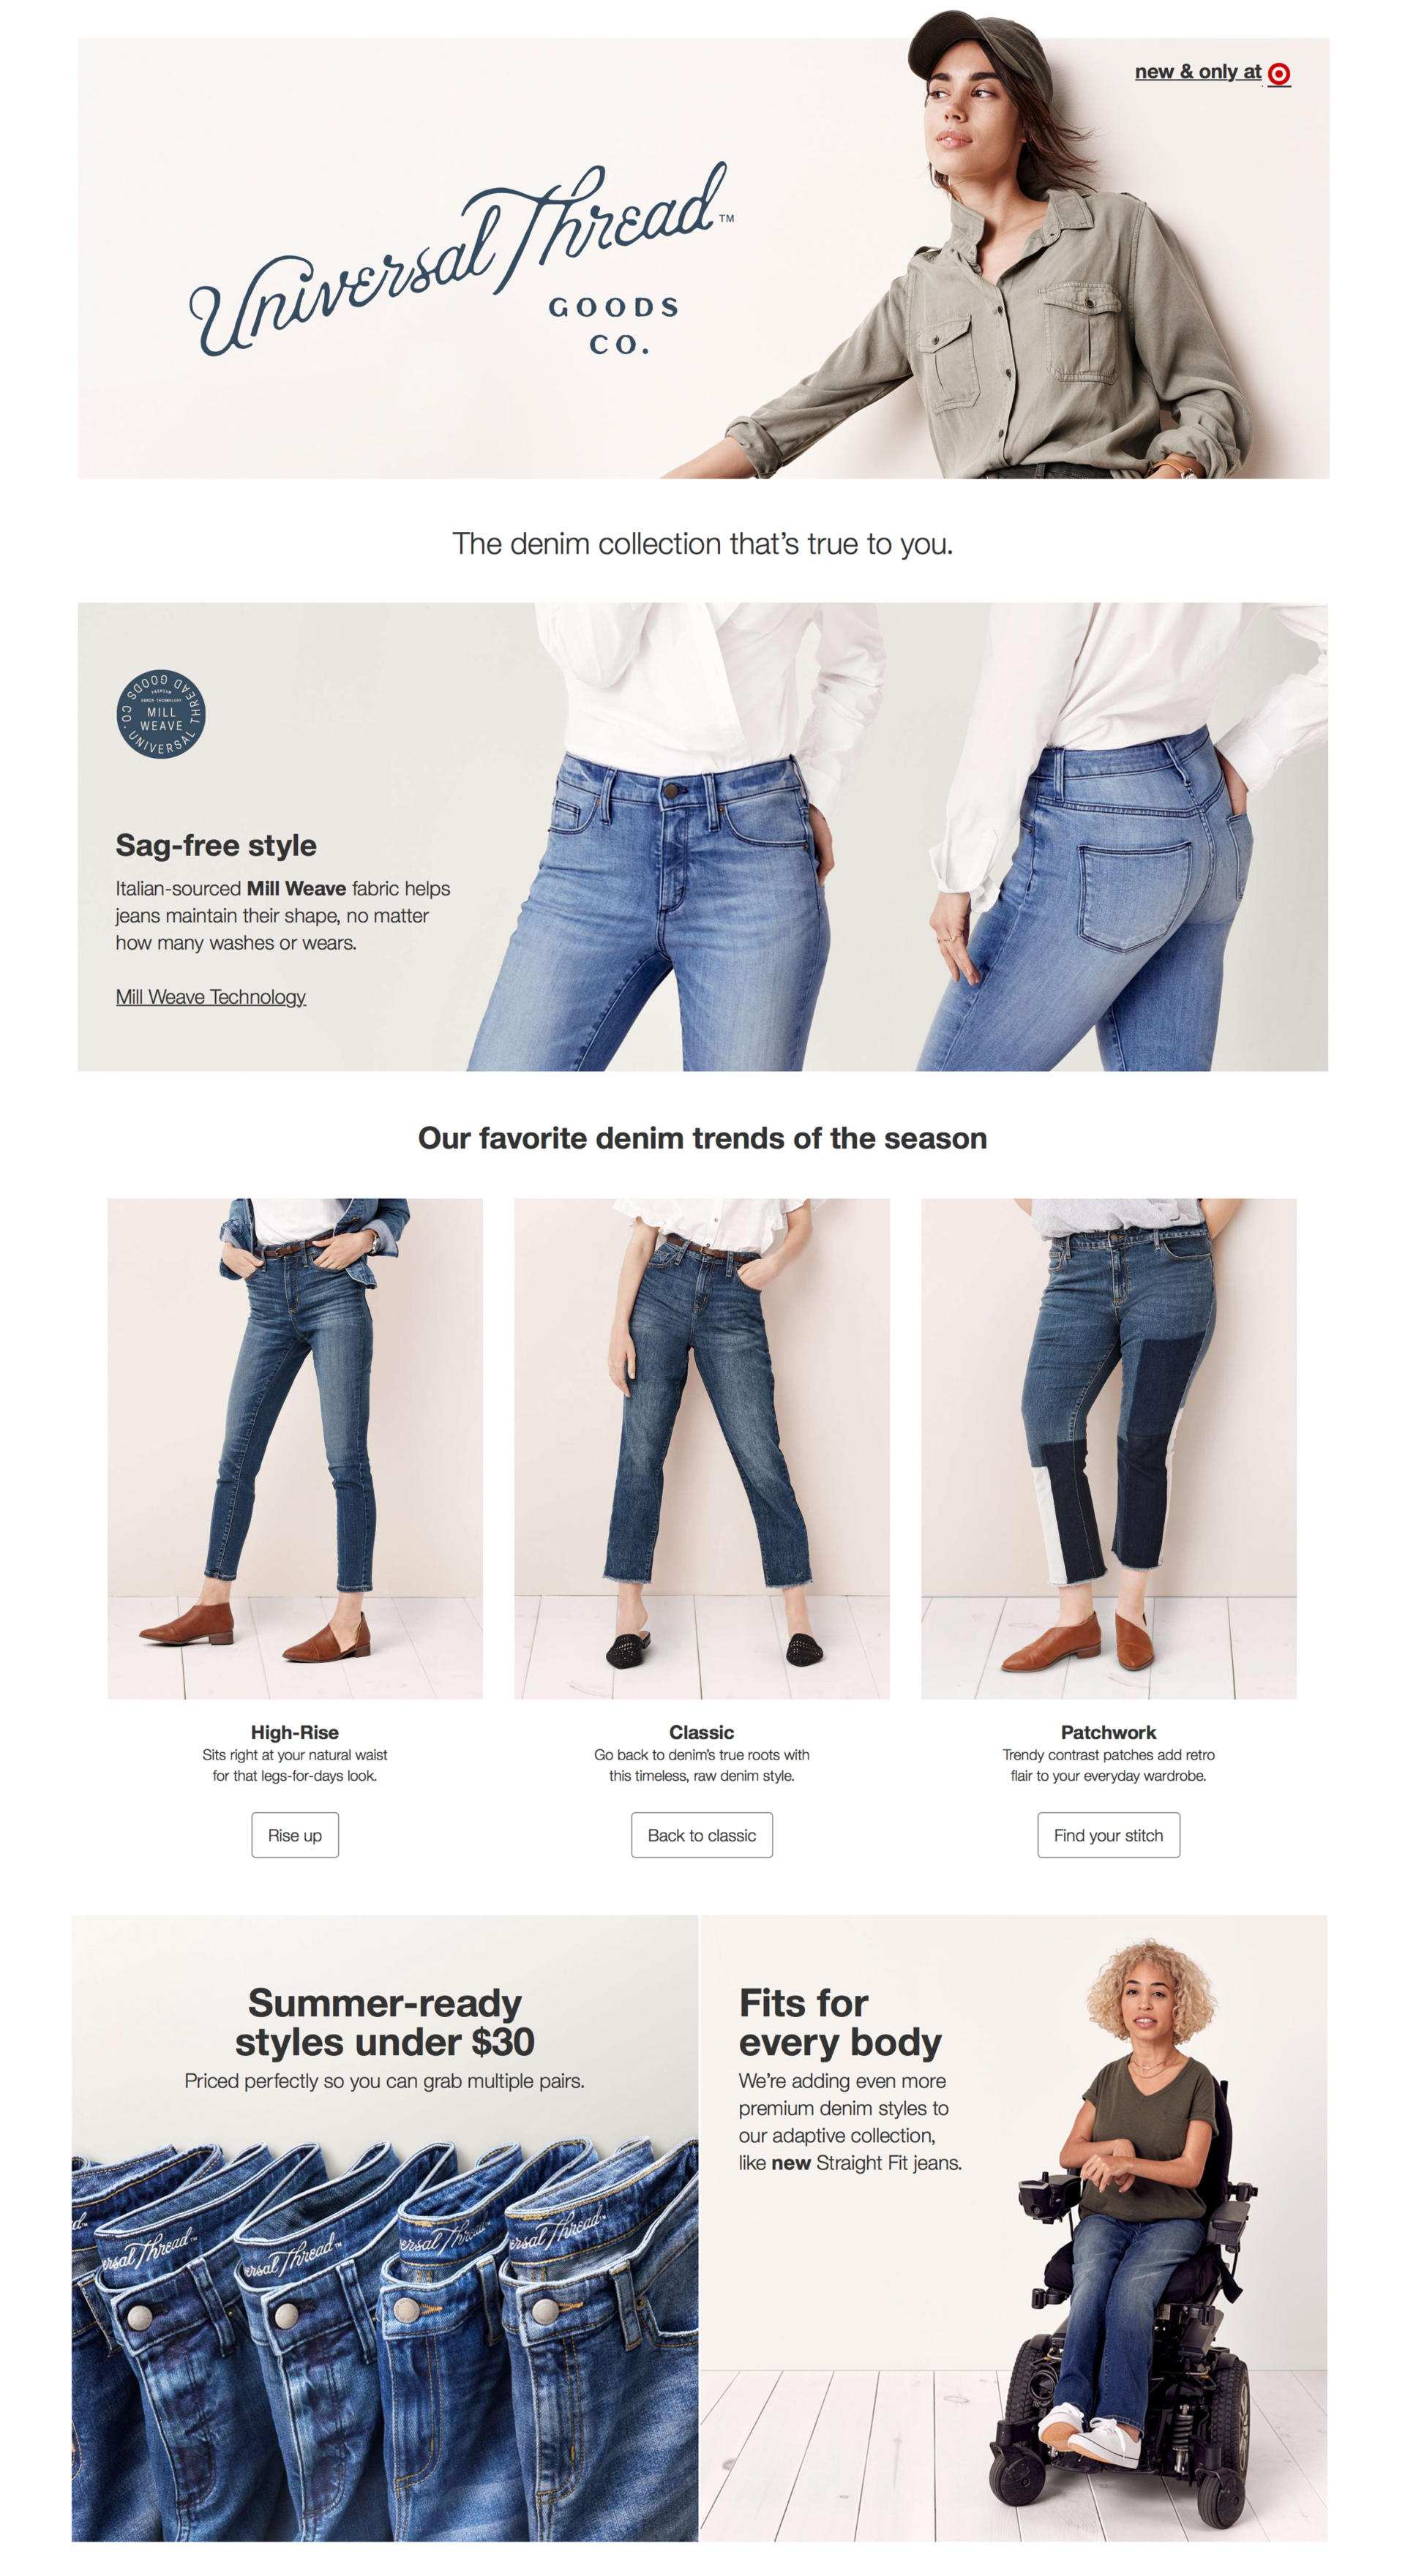 Target Jeans: Universal Thread Denim Review - Abby Saylor Armbruster